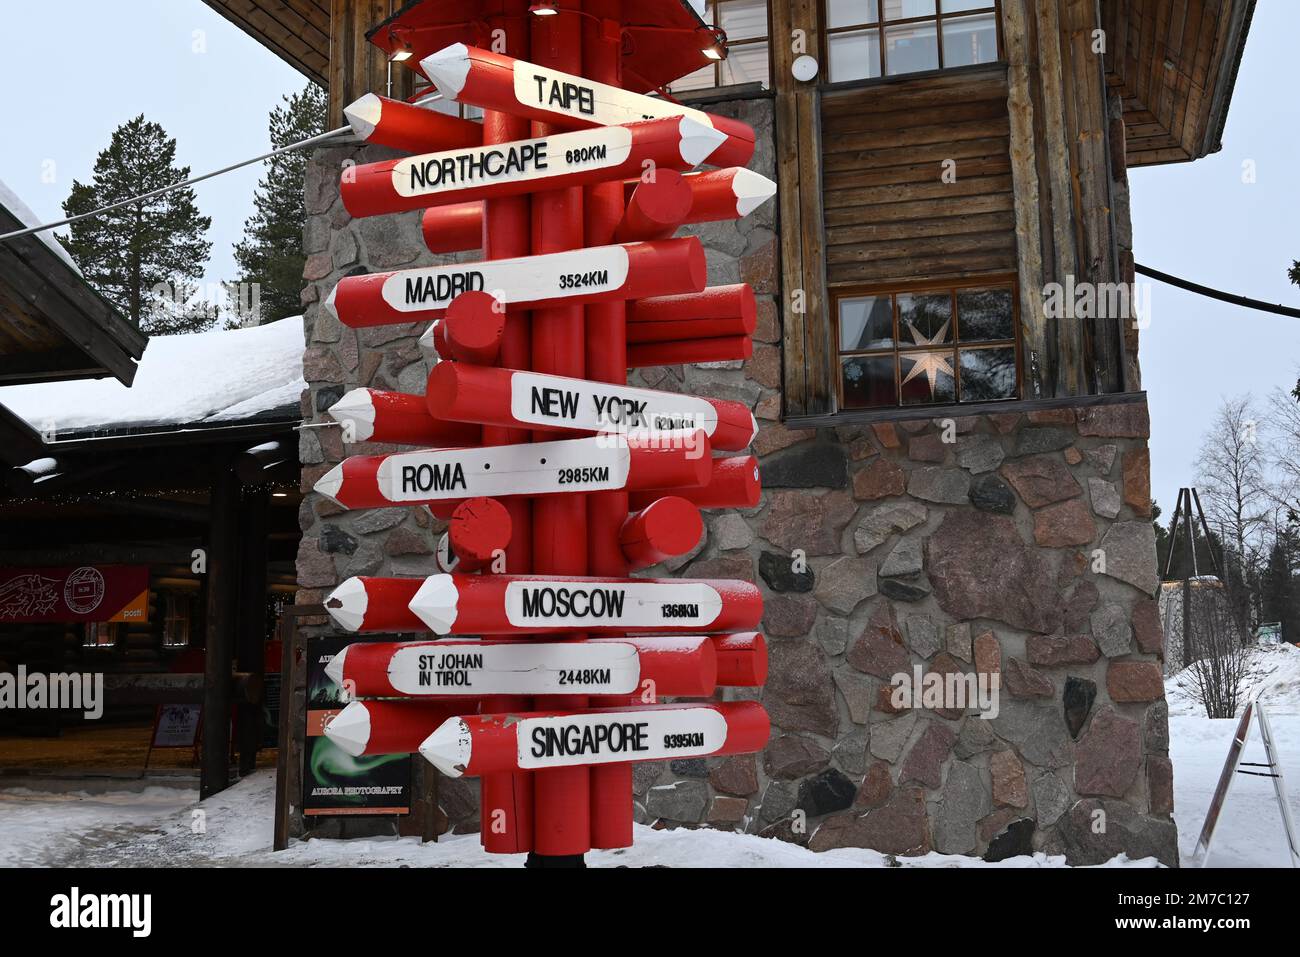 Some kilimeters north of Rovaniemi, the Santa Claus village displays an original international sign board listing the main world cities. Stock Photo